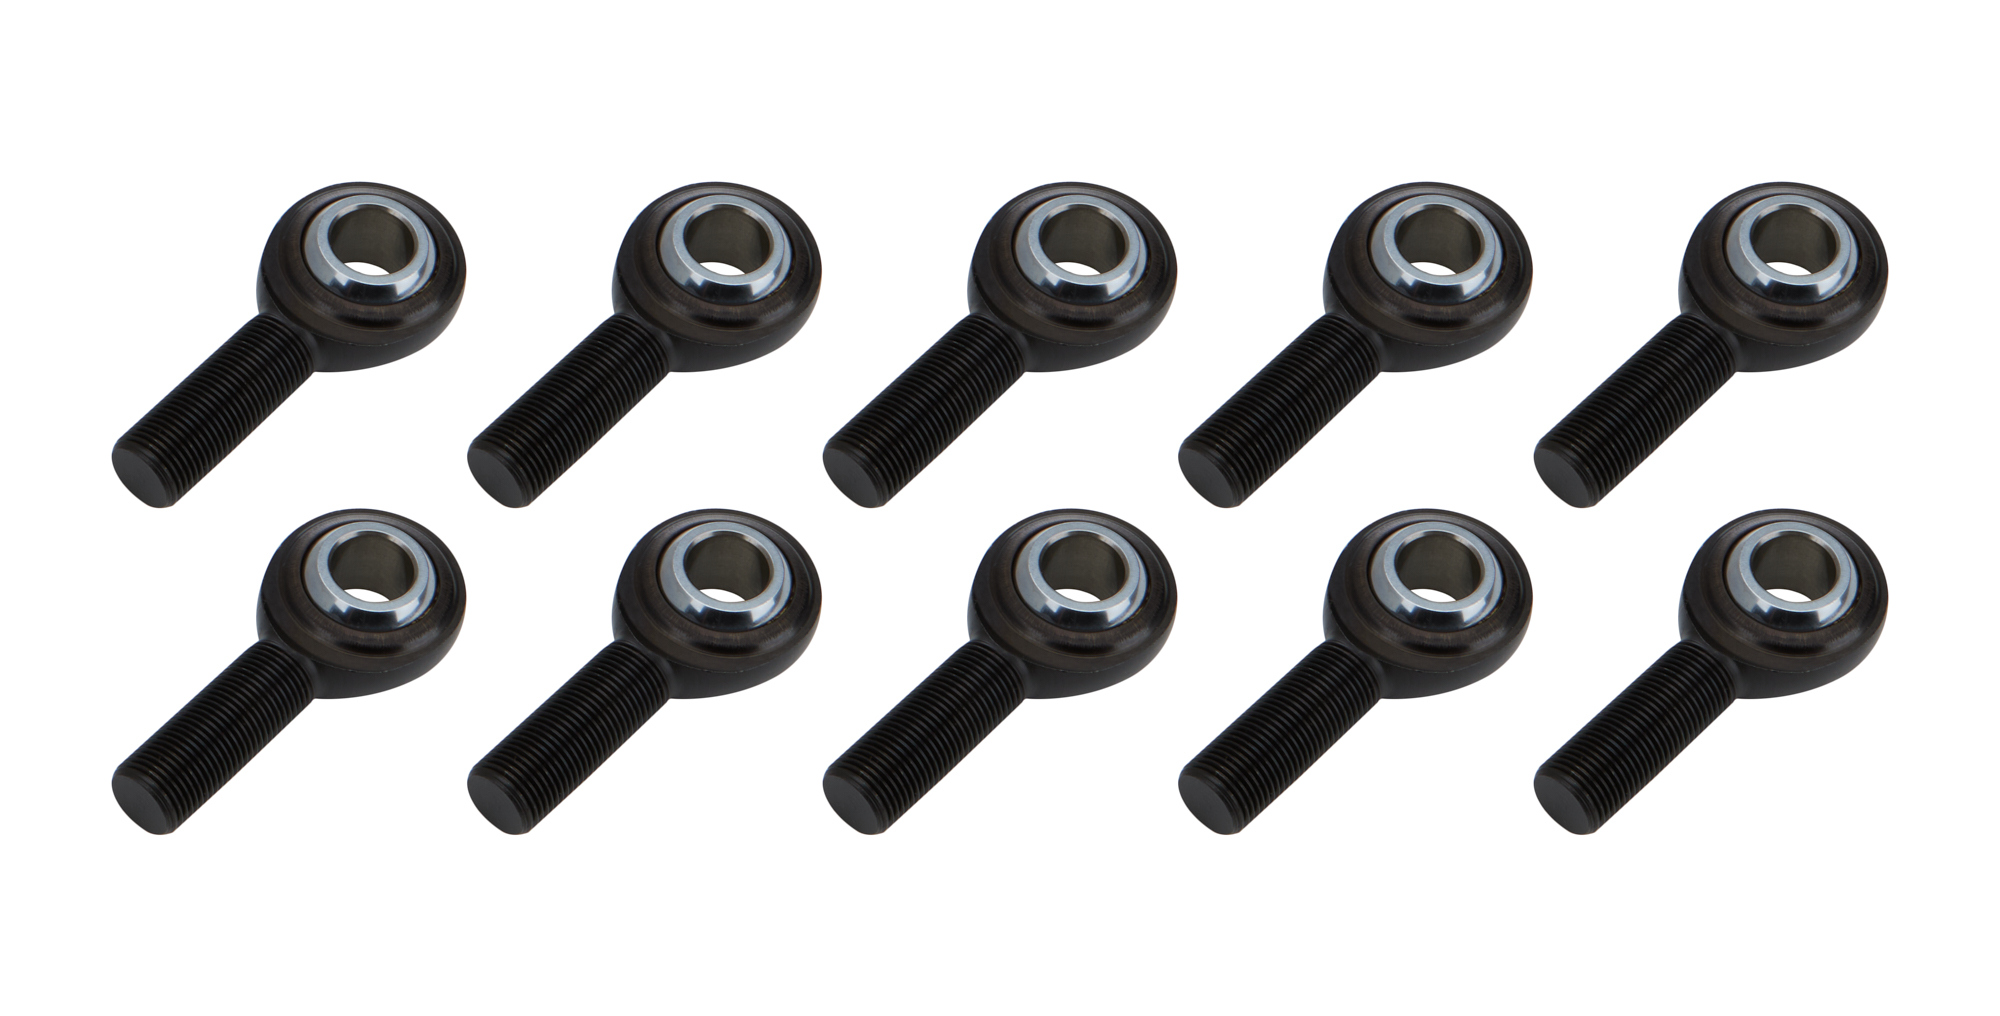 Allstar Performance 58080-10 Rod End, Pro Series, Spherical, 5/8 in Bore, 5/8-18 in Right Hand Male Thread, PTFE Lined, Chromoly, Black Oxide, Set of 10